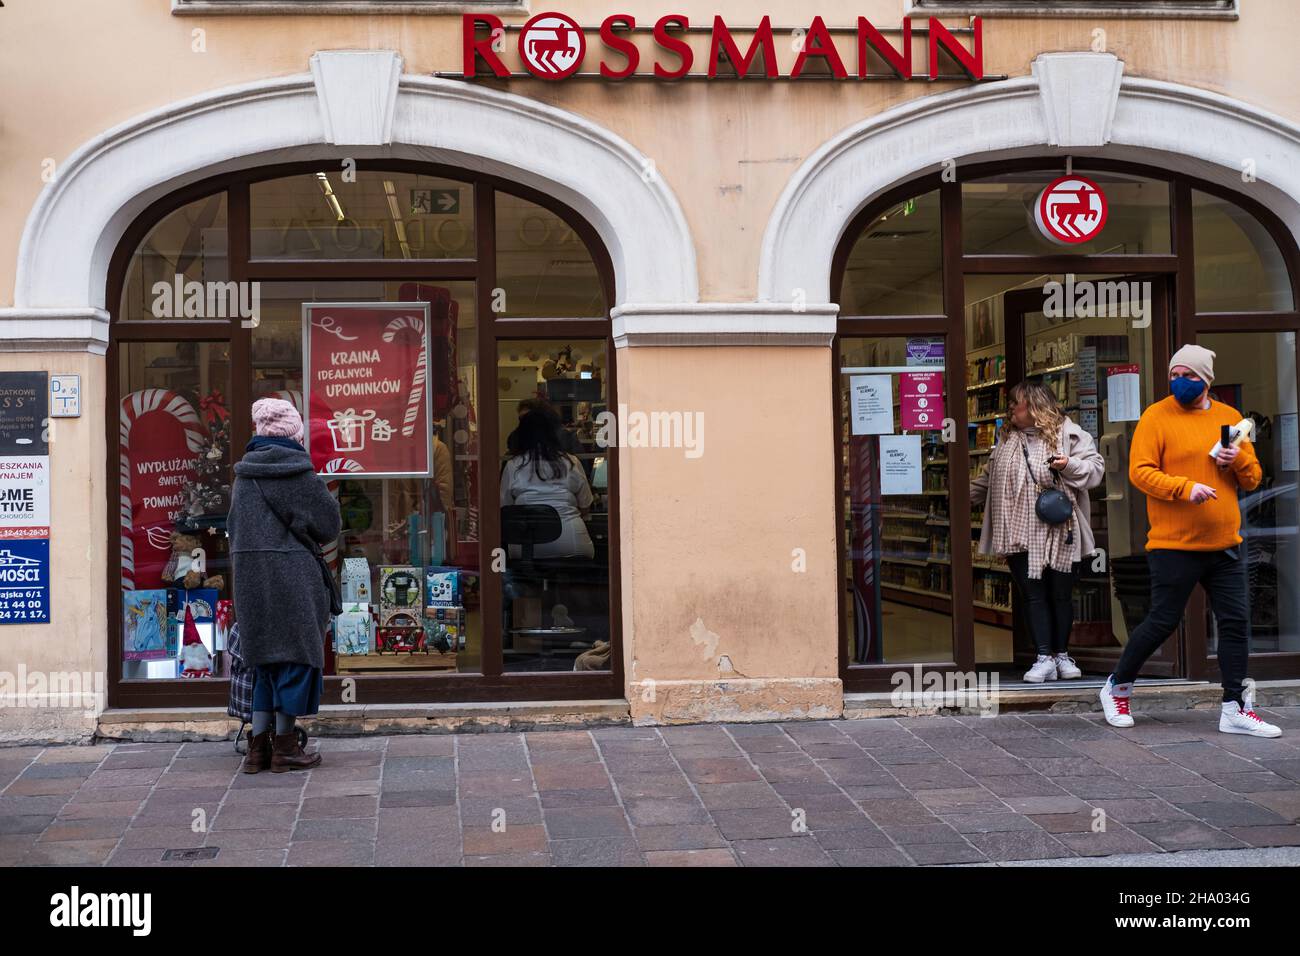 Shopping in beauty shop in winter, Rossmann shop with customers in Krakow, Poland. Customers wear face masks. Stock Photo